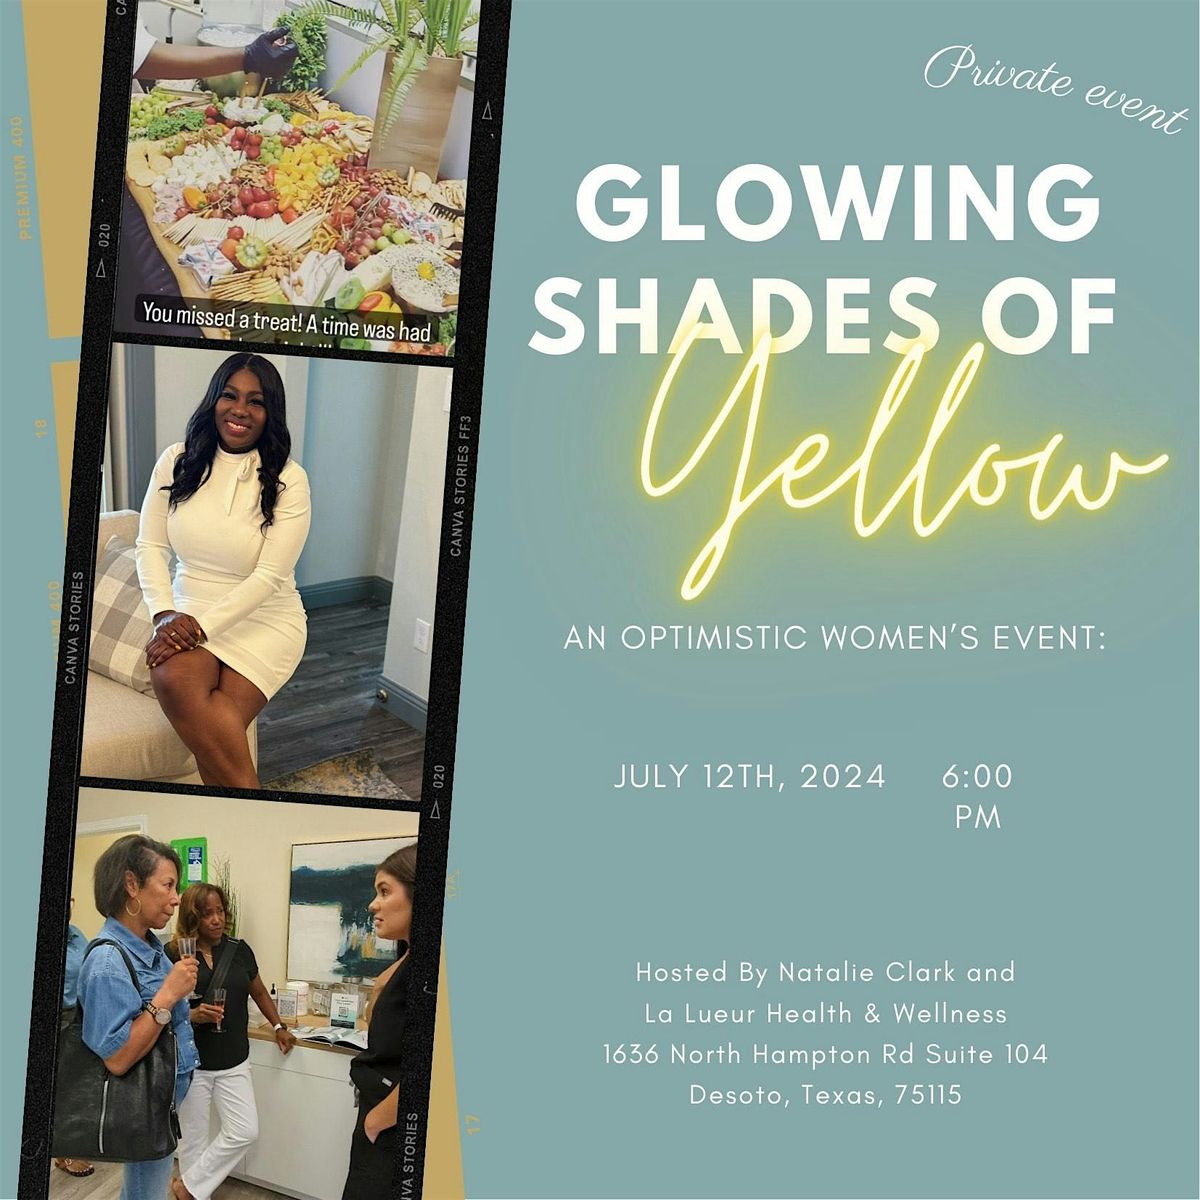 Glowing Shades of Yellow Optimistic Women's Event